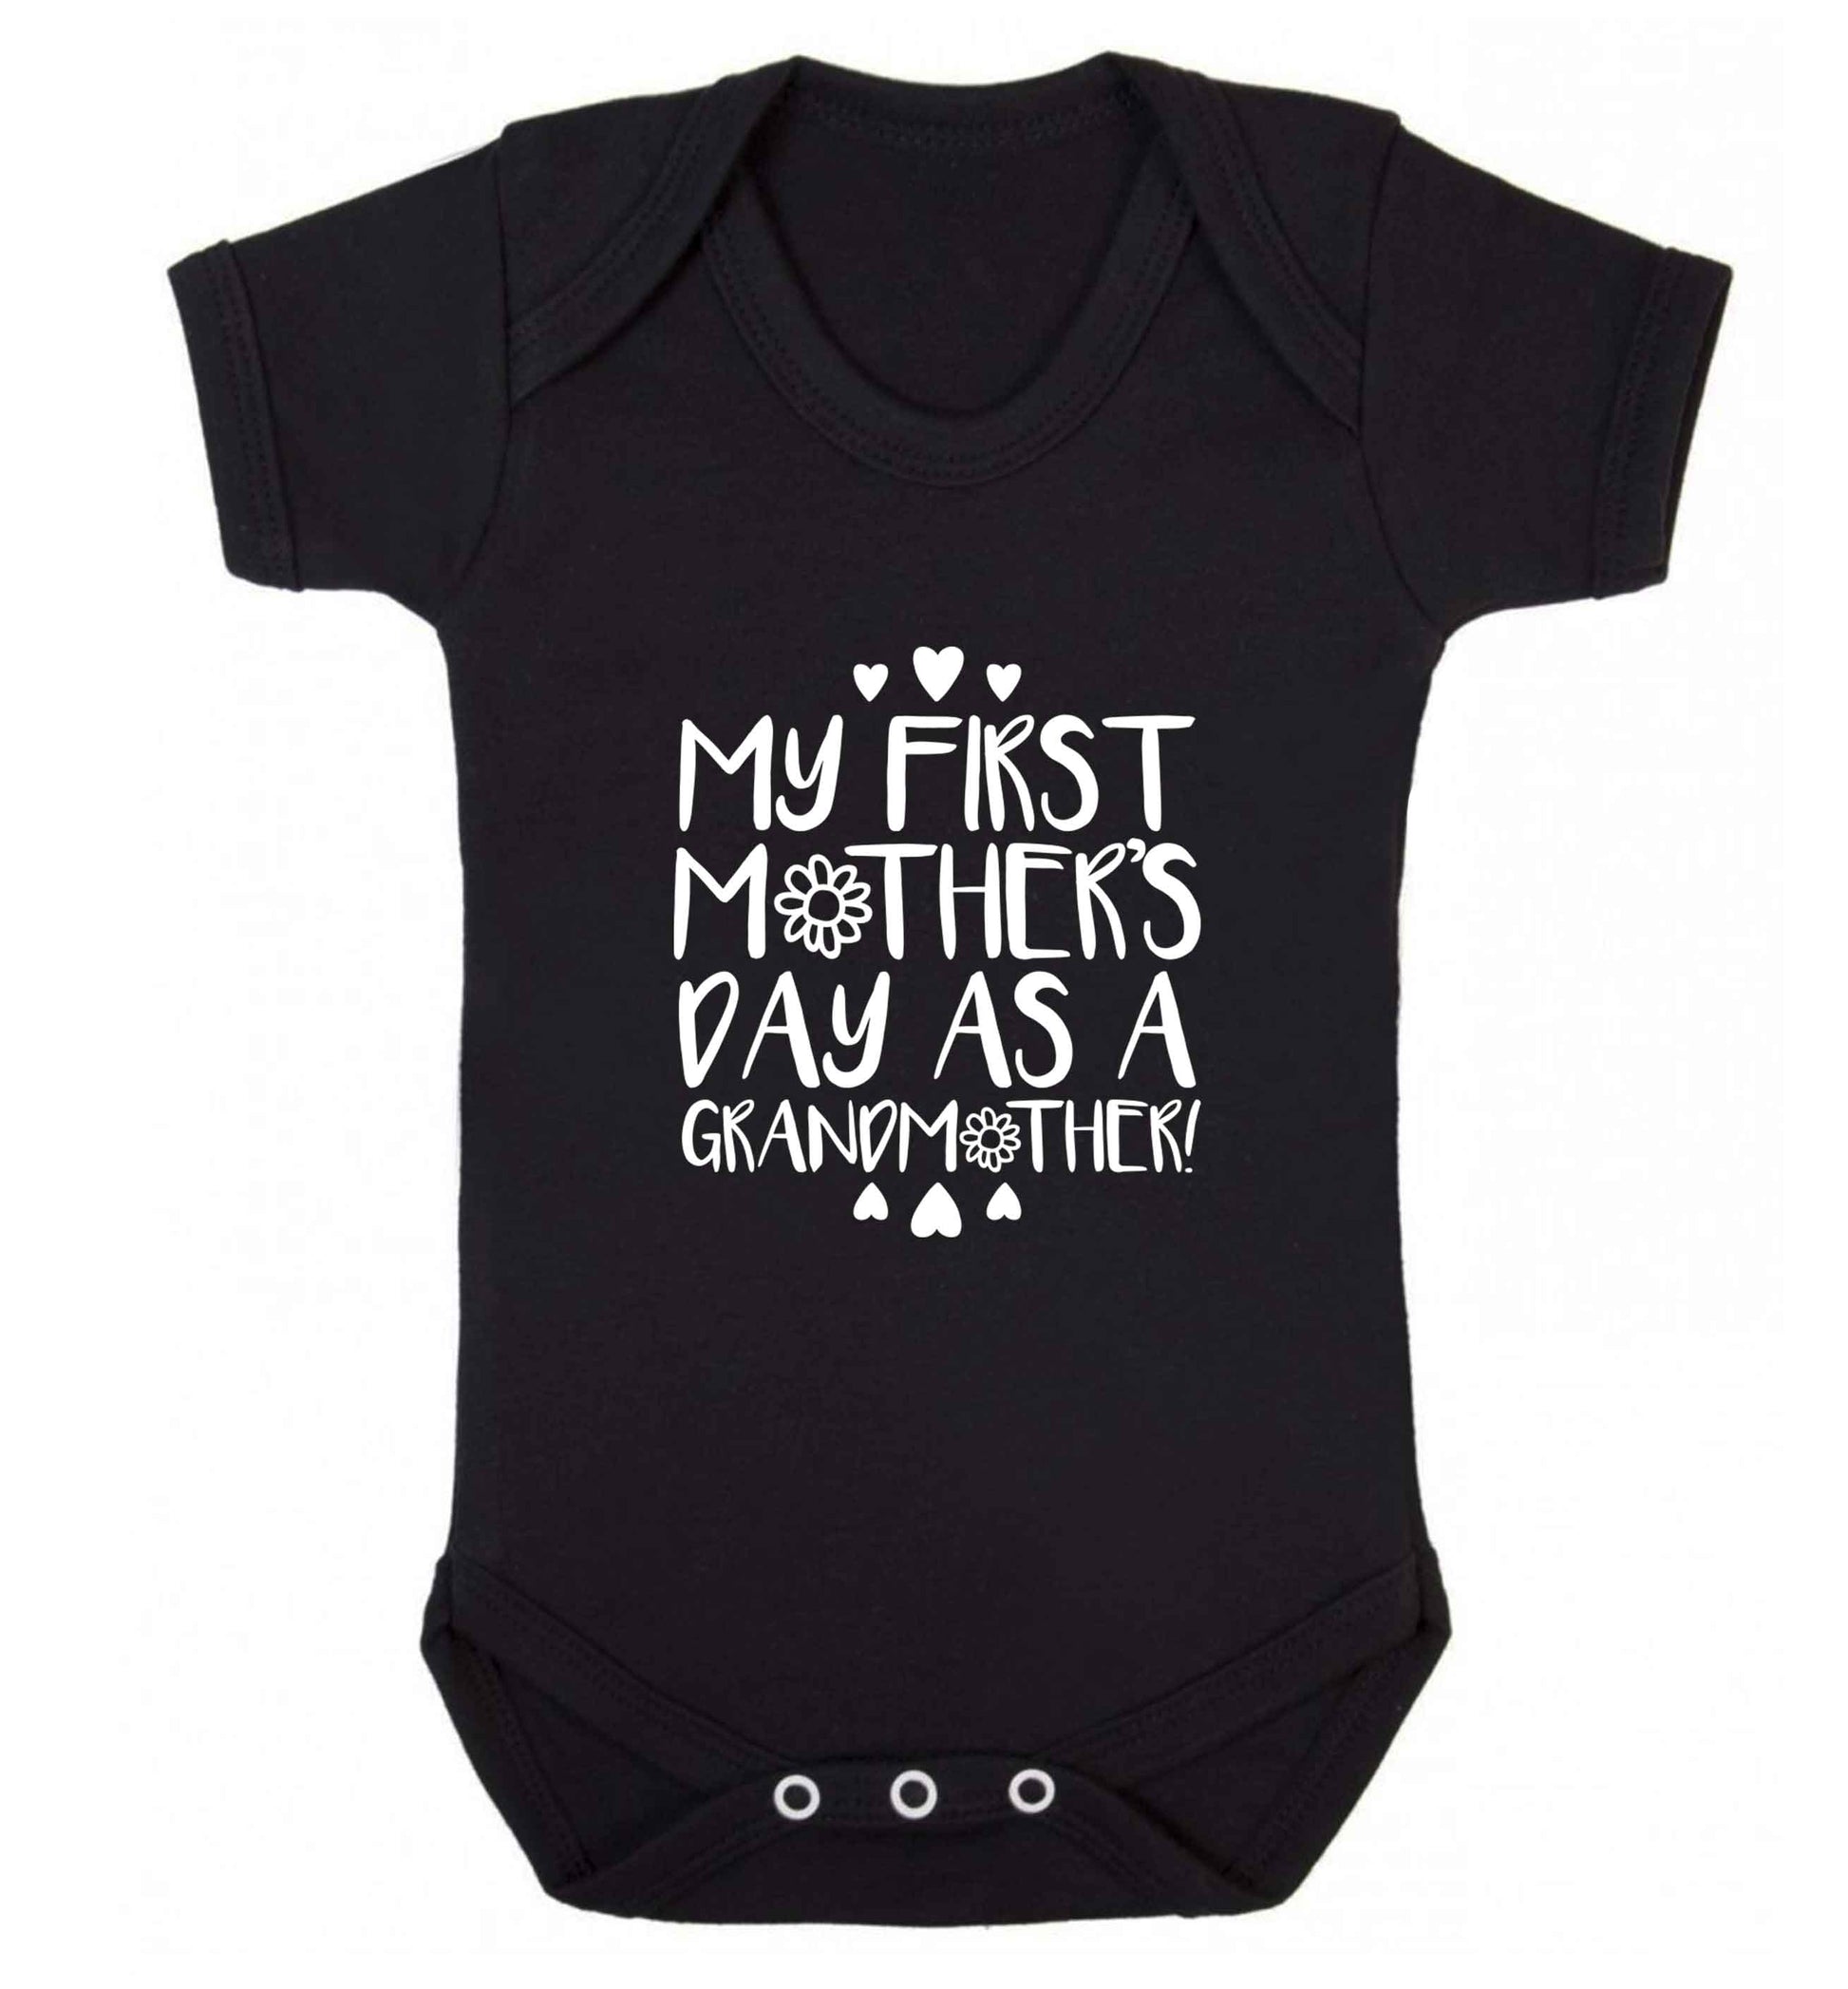 It's my first mother's day as a grandmother baby vest black 18-24 months